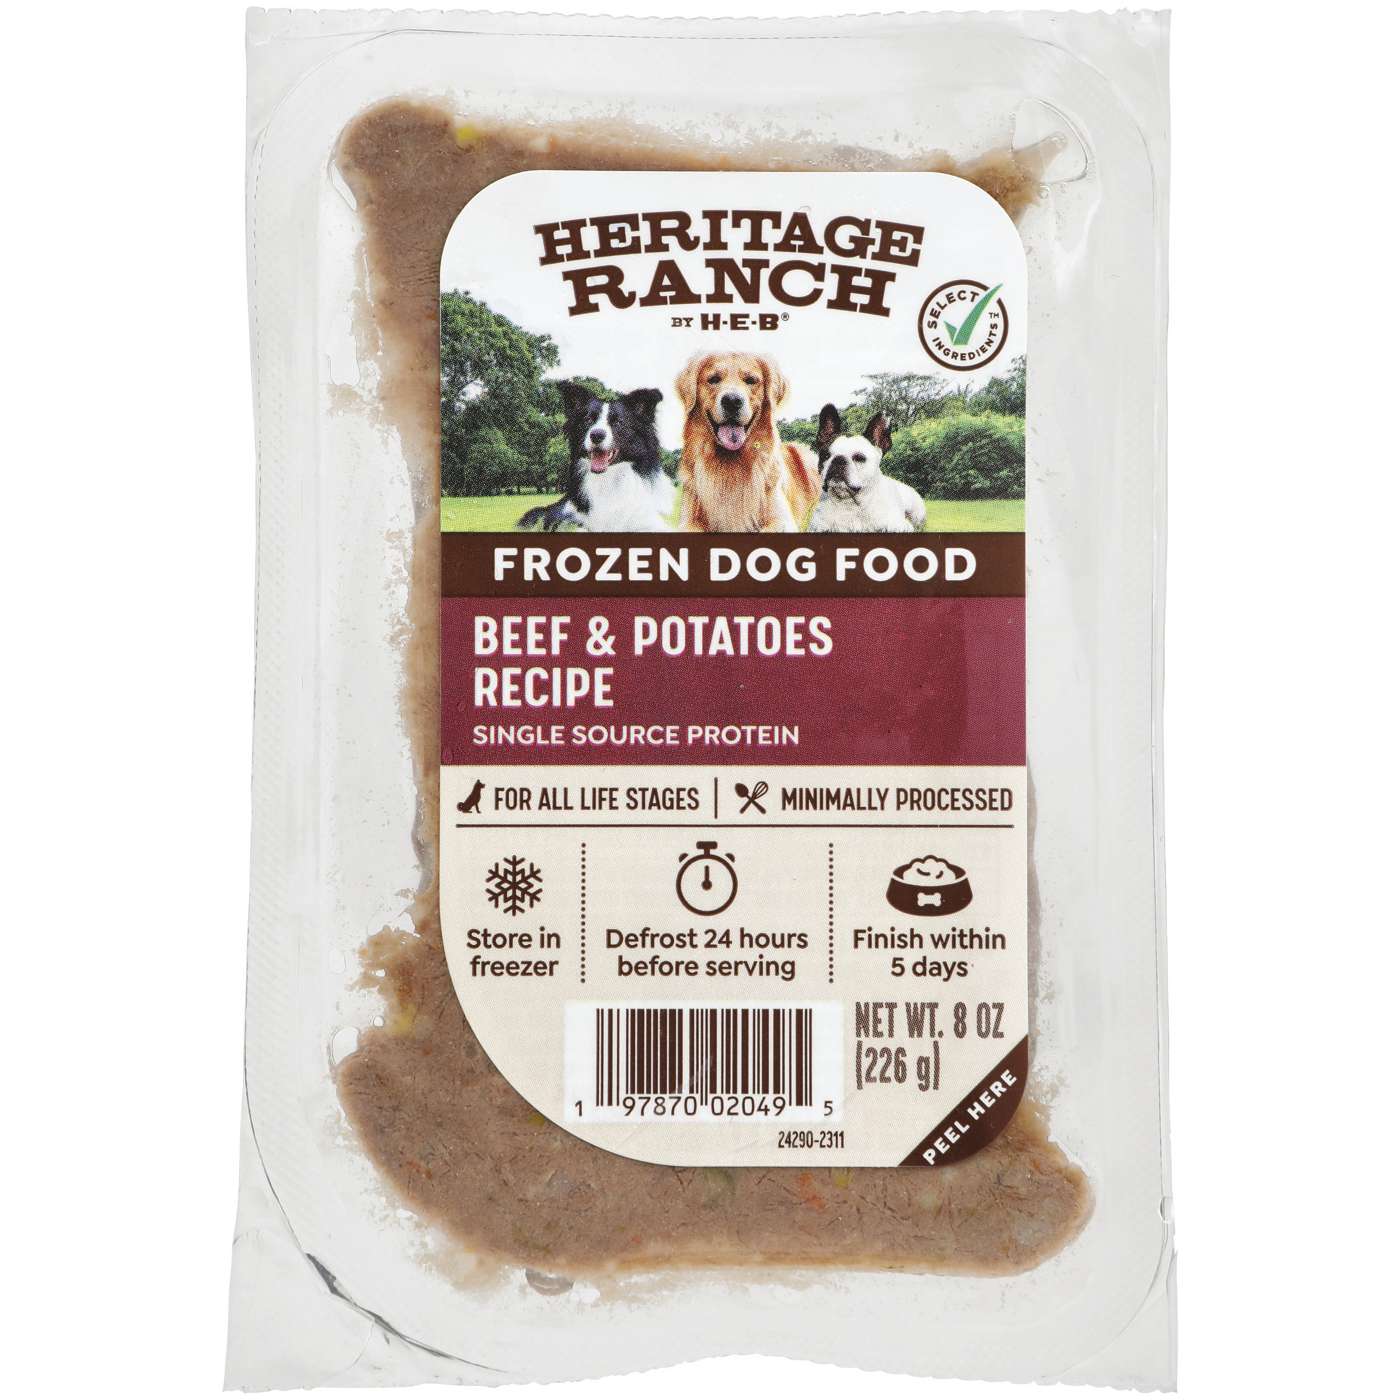 Heritage Ranch by H-E-B Frozen Dog Food – Beef & Potatoes; image 1 of 7